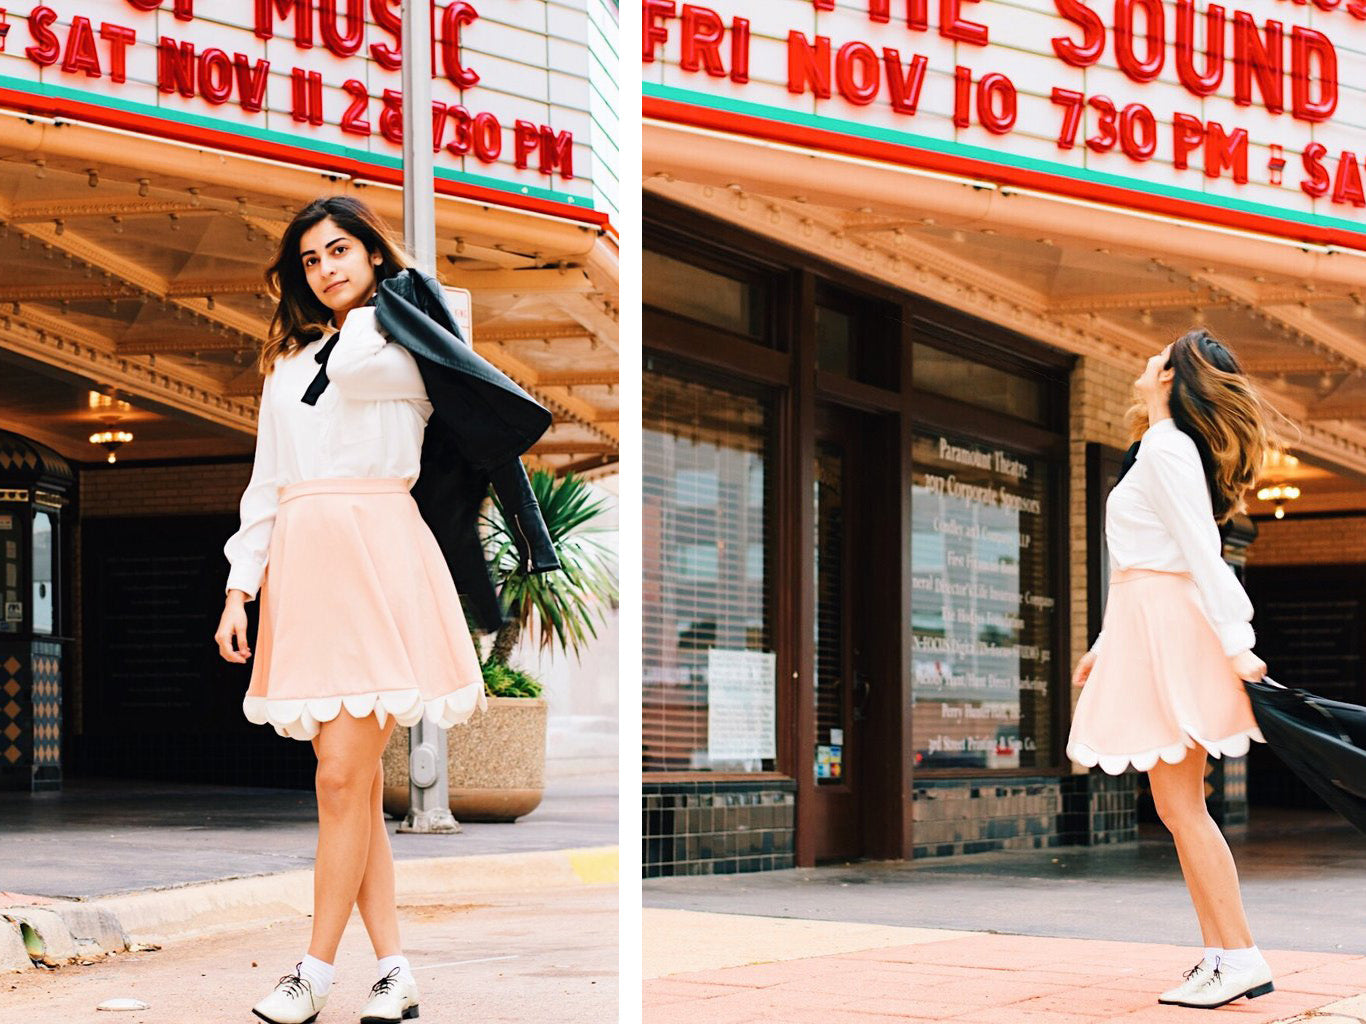 diptych of destiny velasquez in skirt and blouse in front of venue with 'the sound of music', date, and time listing on marquis.